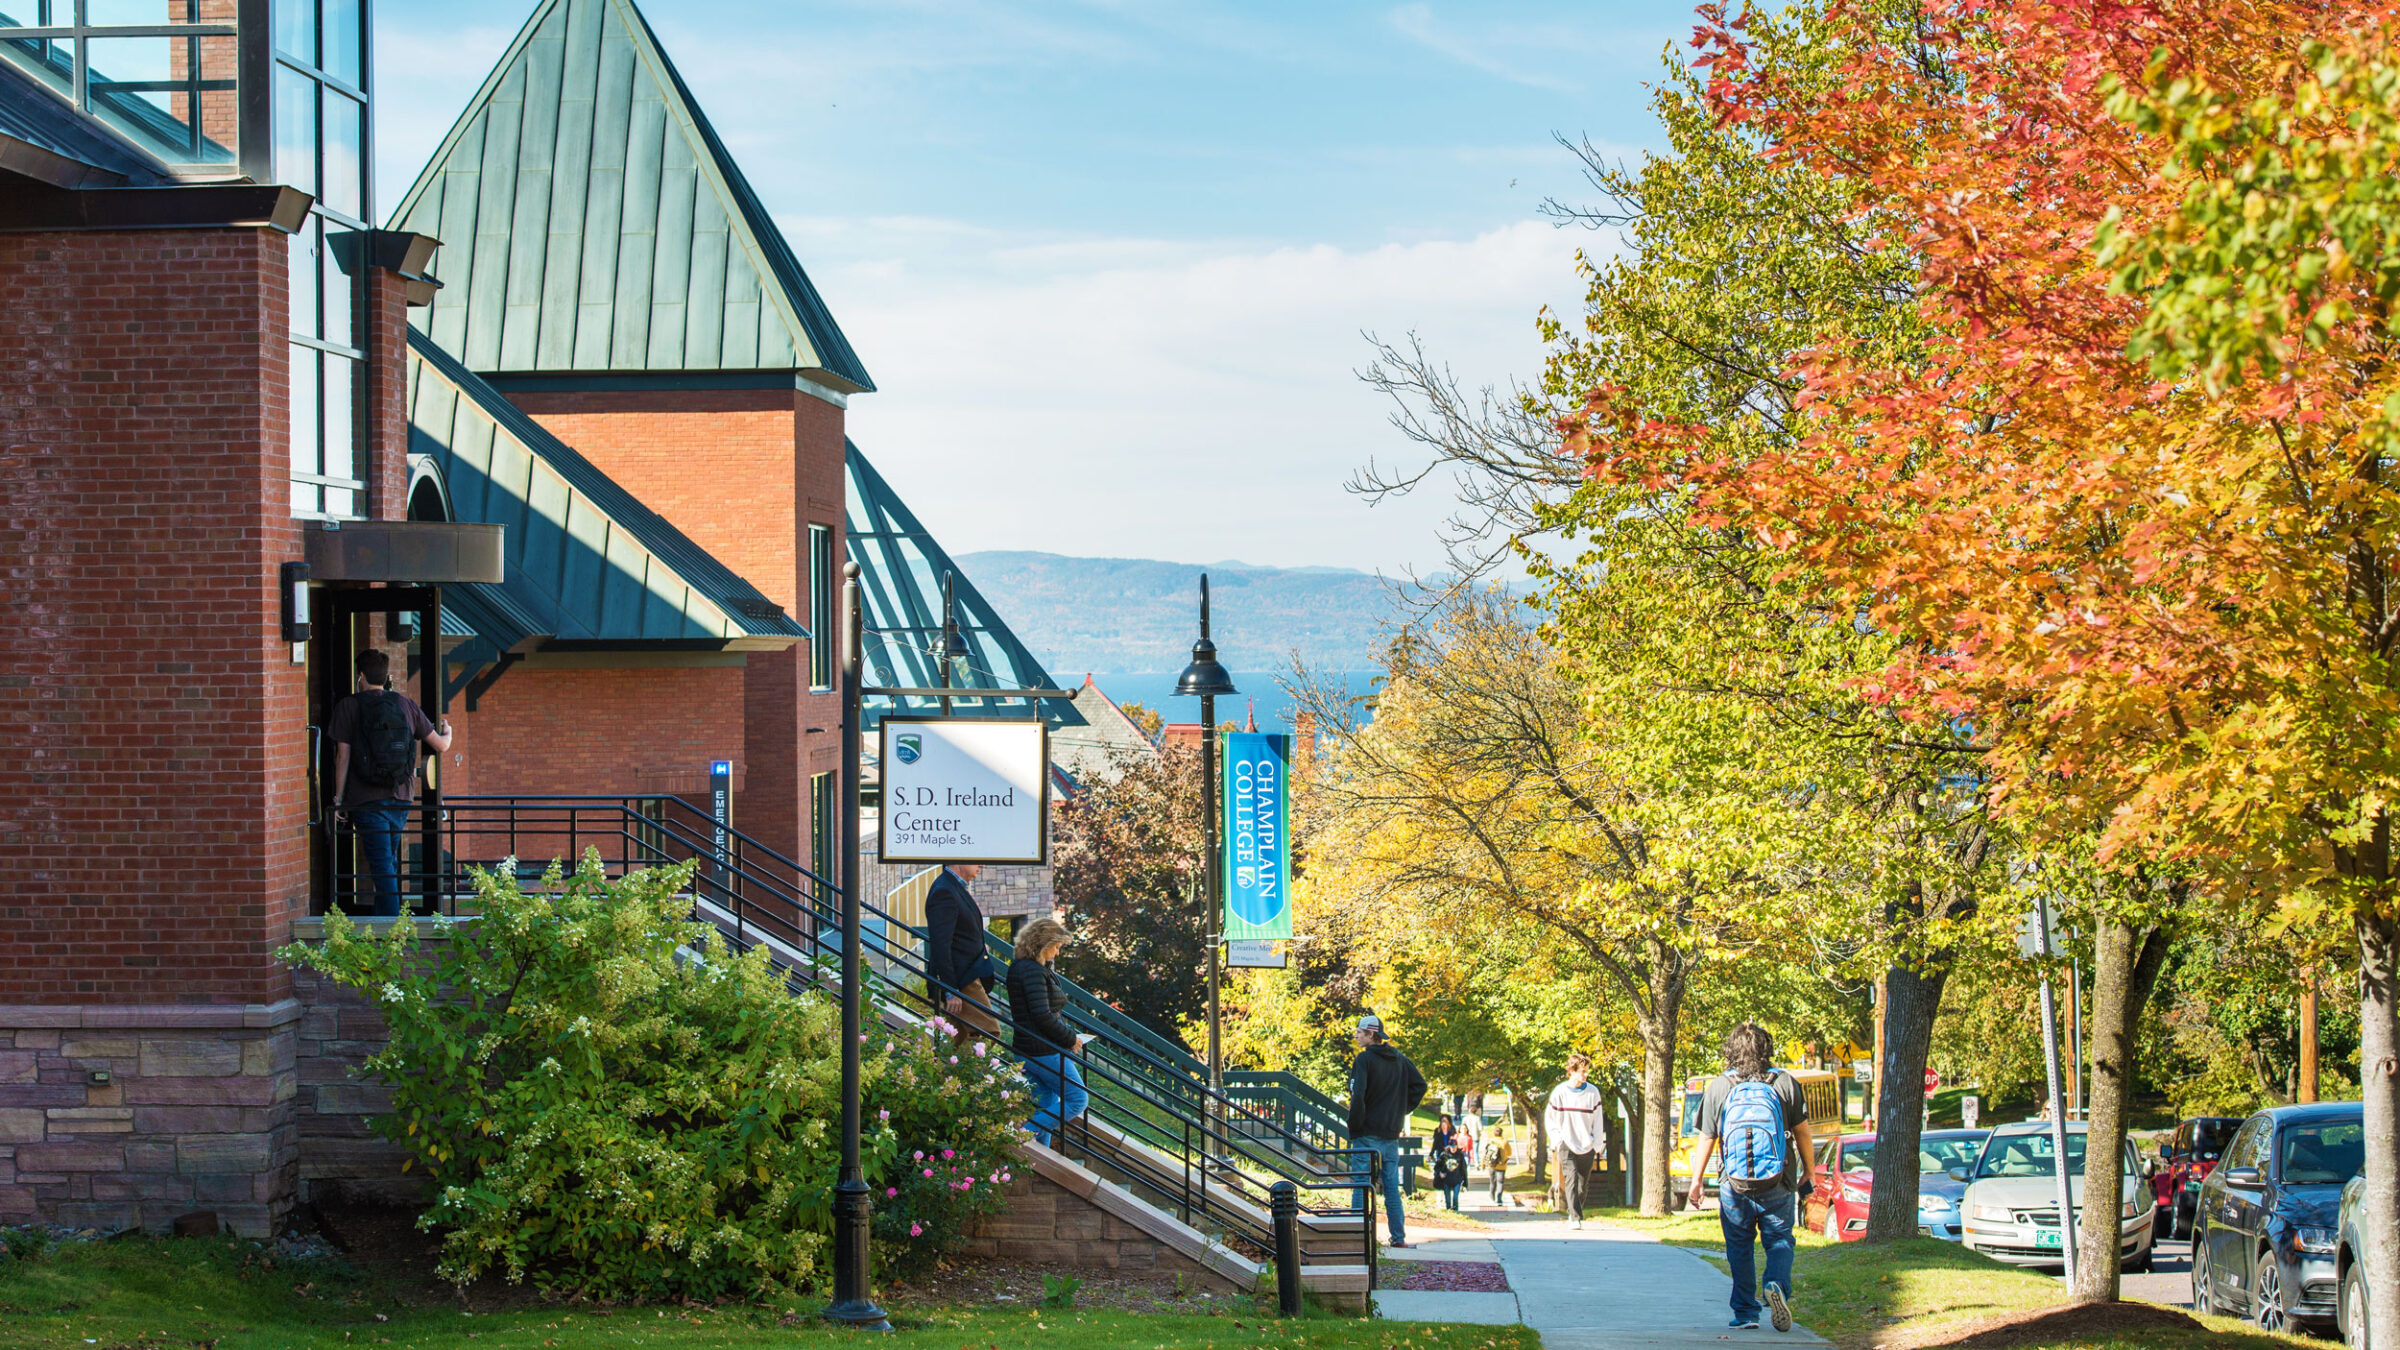 Champlain campus buildings along Maple Street in the fall